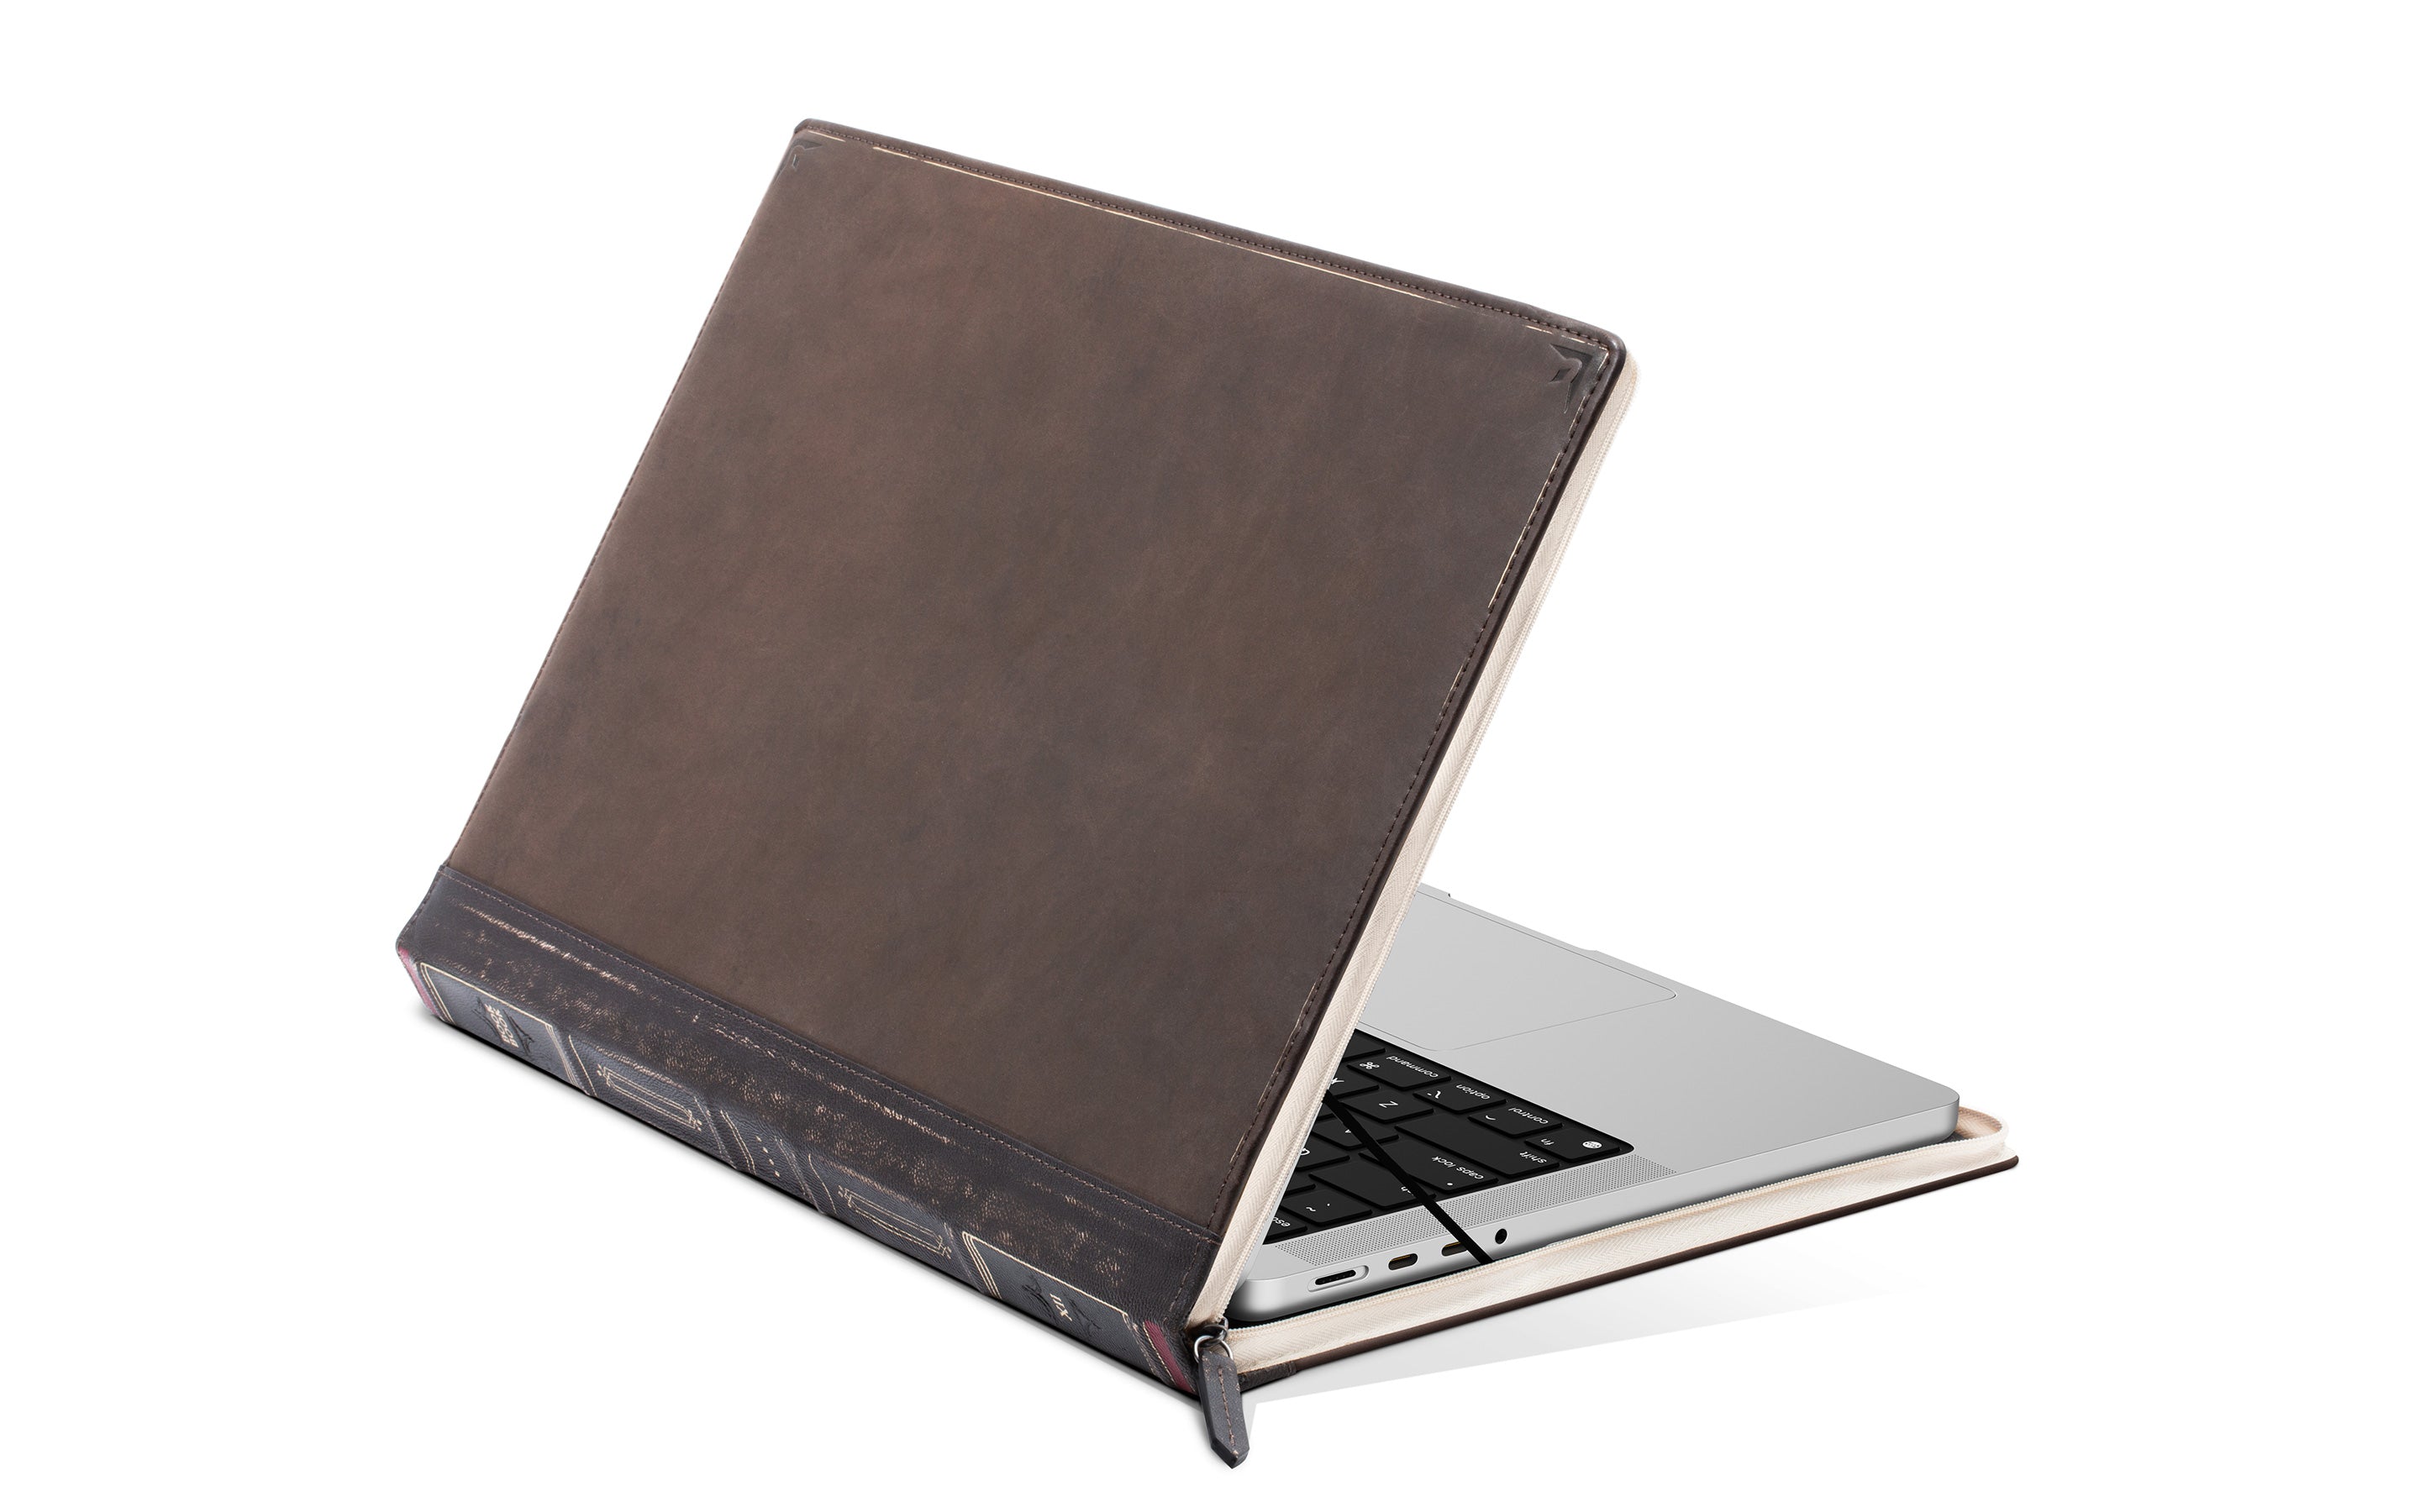 BookBook for MacBook from Twelve South